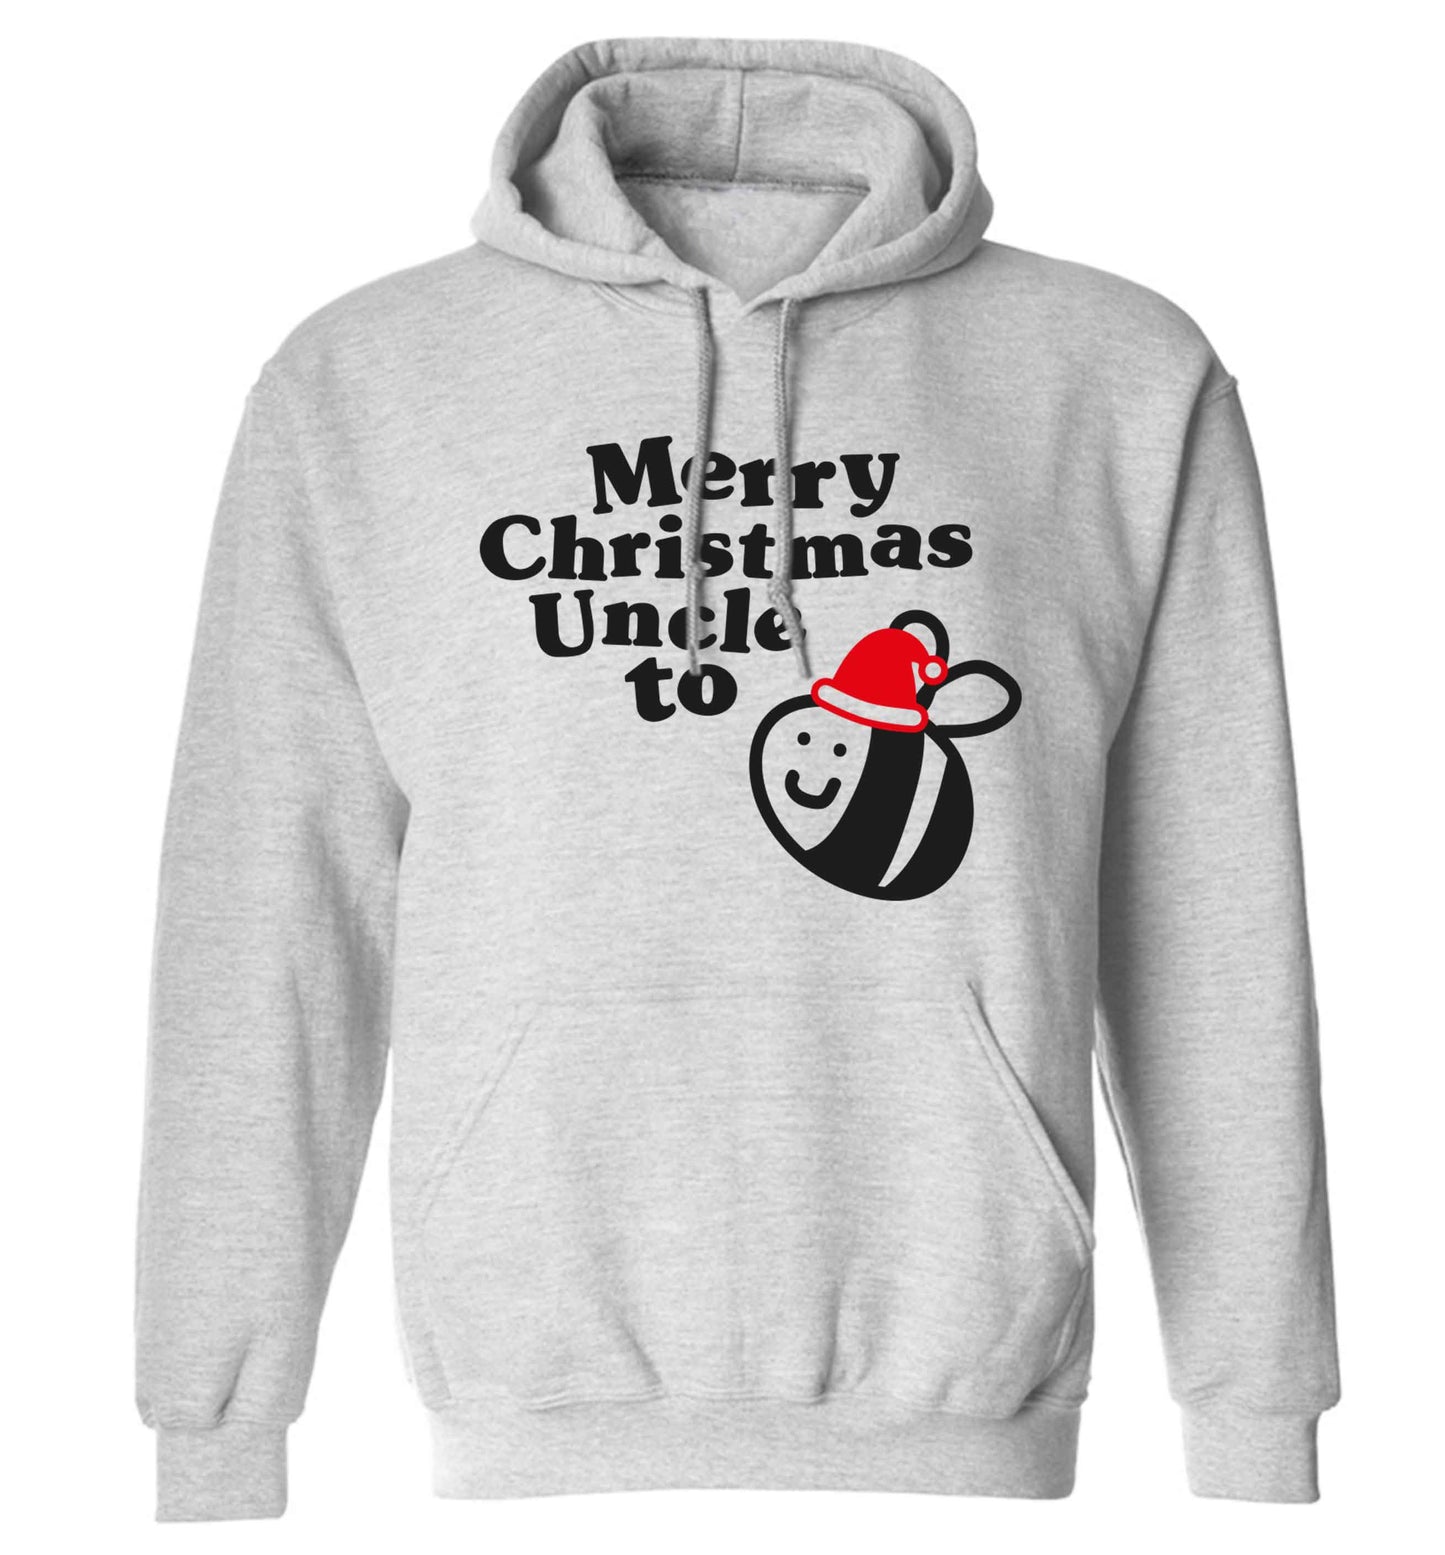 Merry Christmas uncle to be adults unisex grey hoodie 2XL